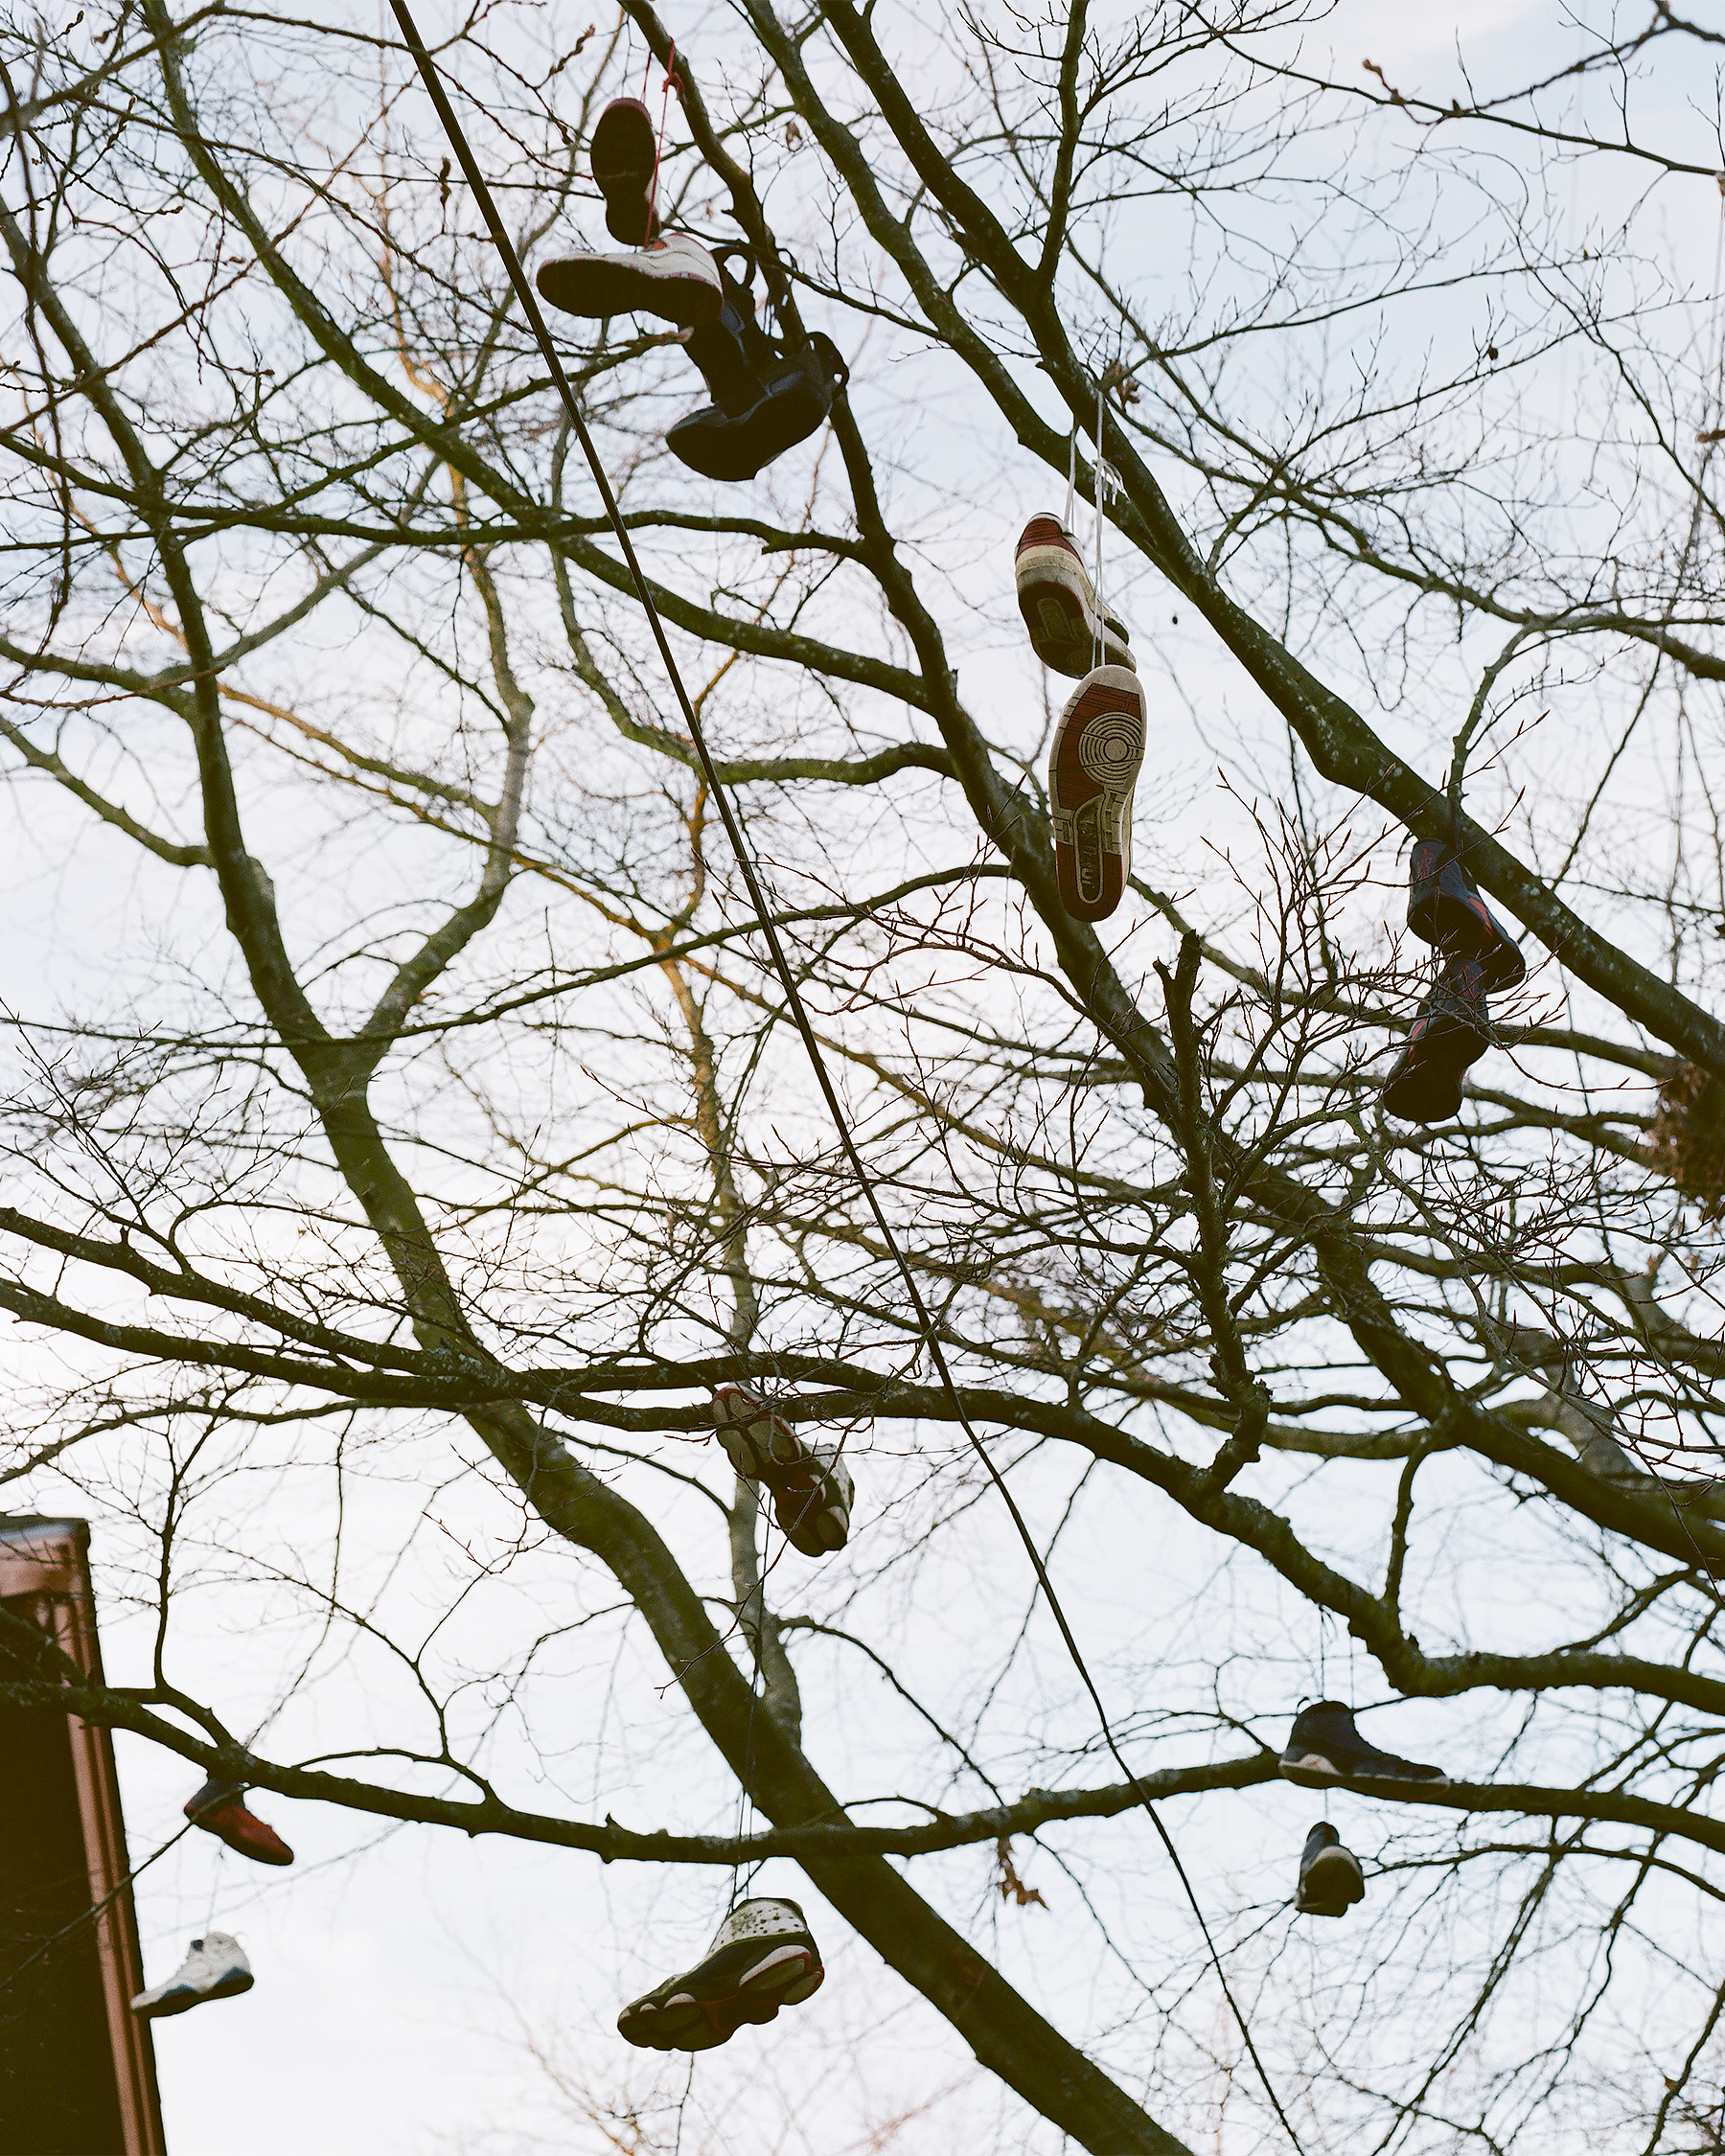 shoes in tree cropped.jpg